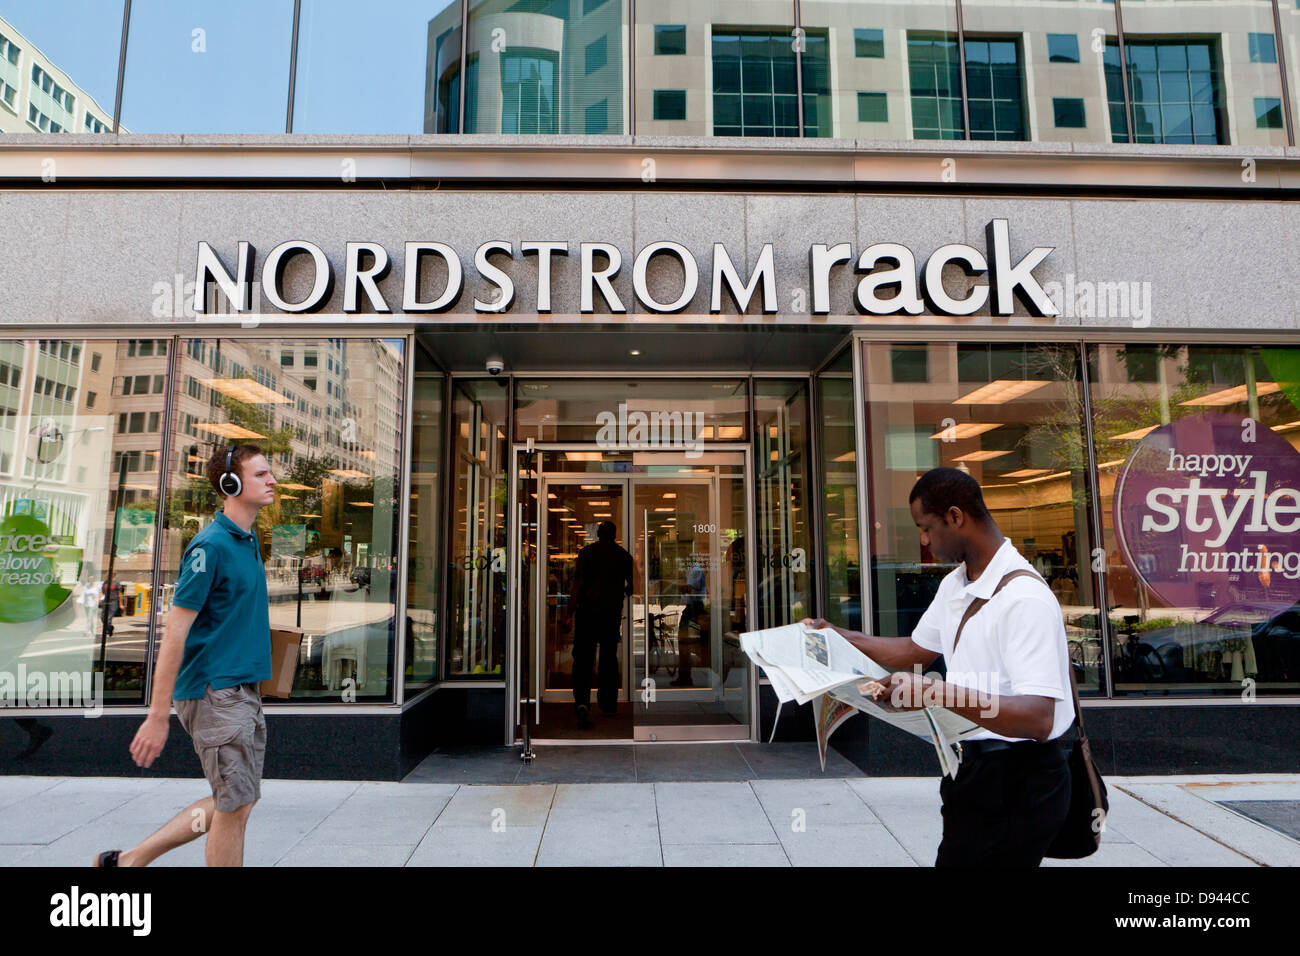 The Nordstrom Retail Store in Seattle Stock Photo - Alamy